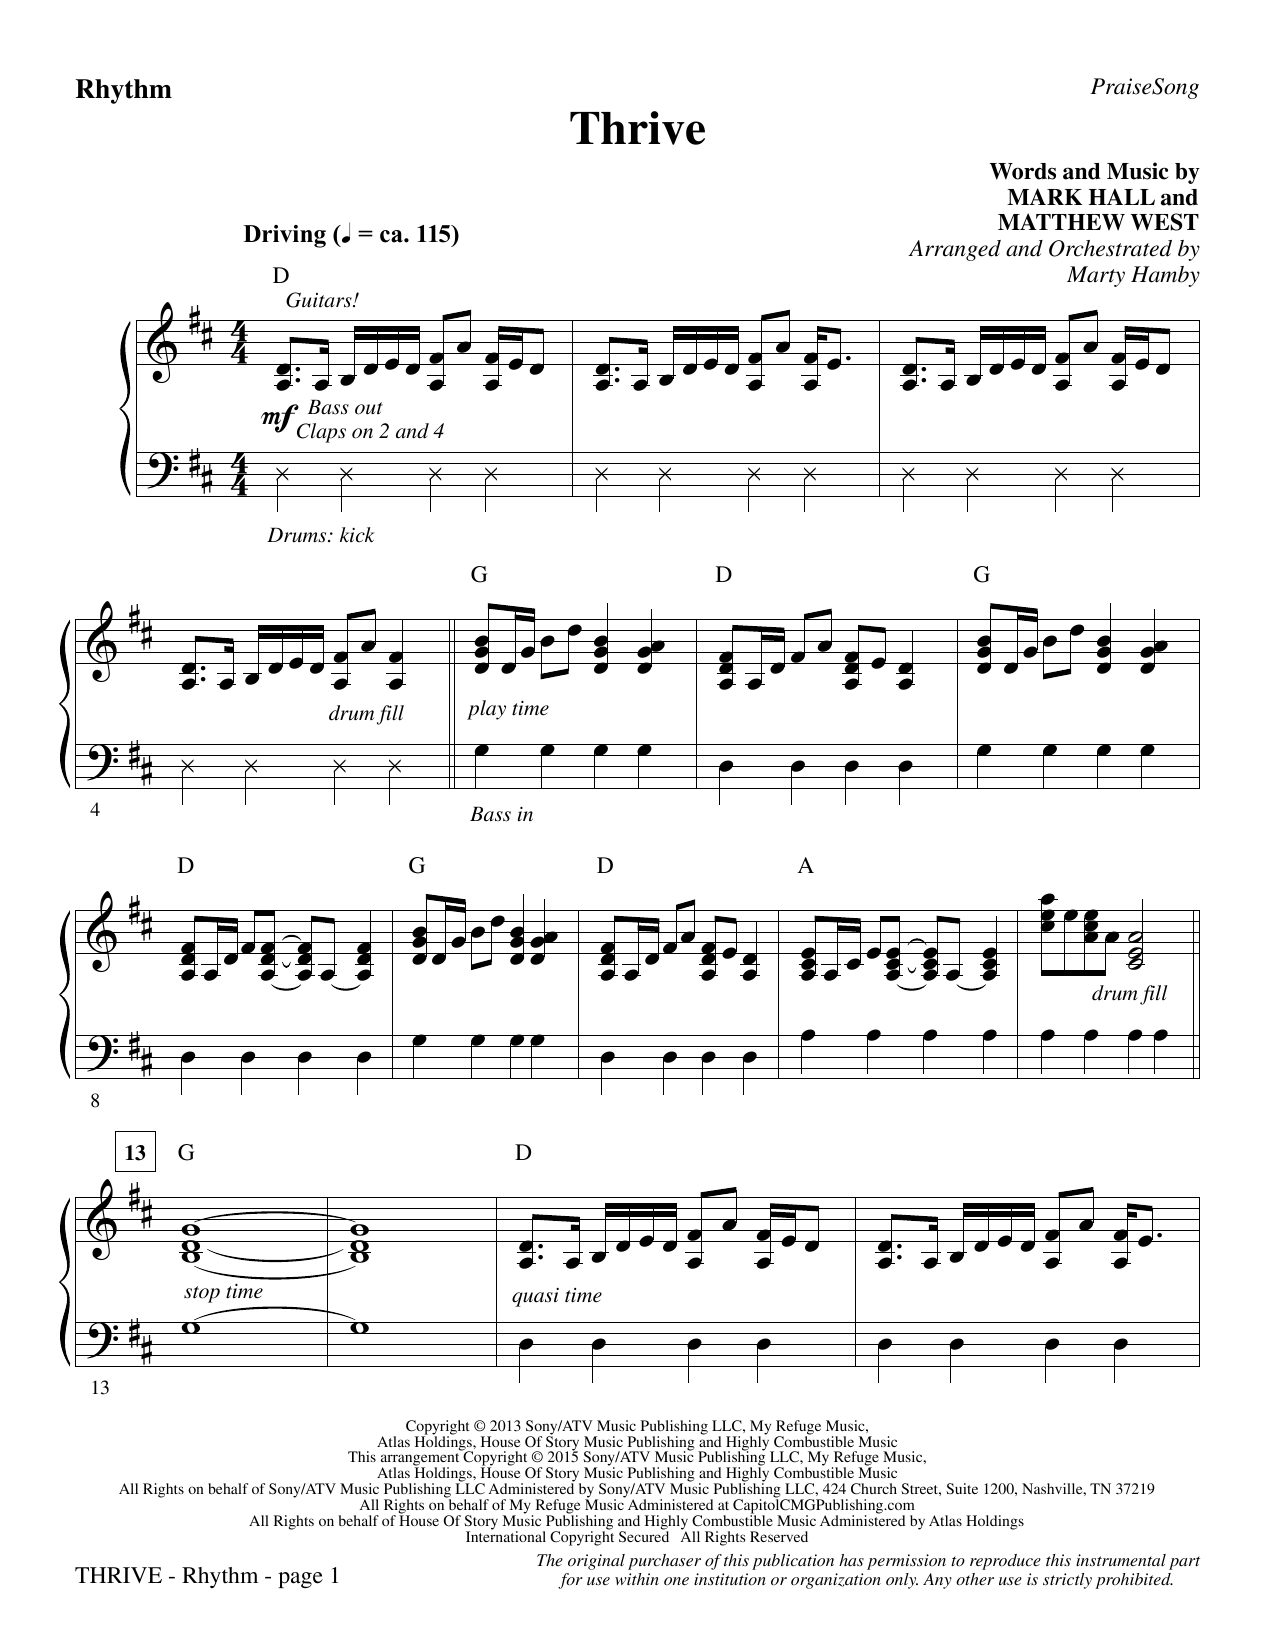 Marty Hamby Thrive - Rhythm sheet music notes and chords. Download Printable PDF.